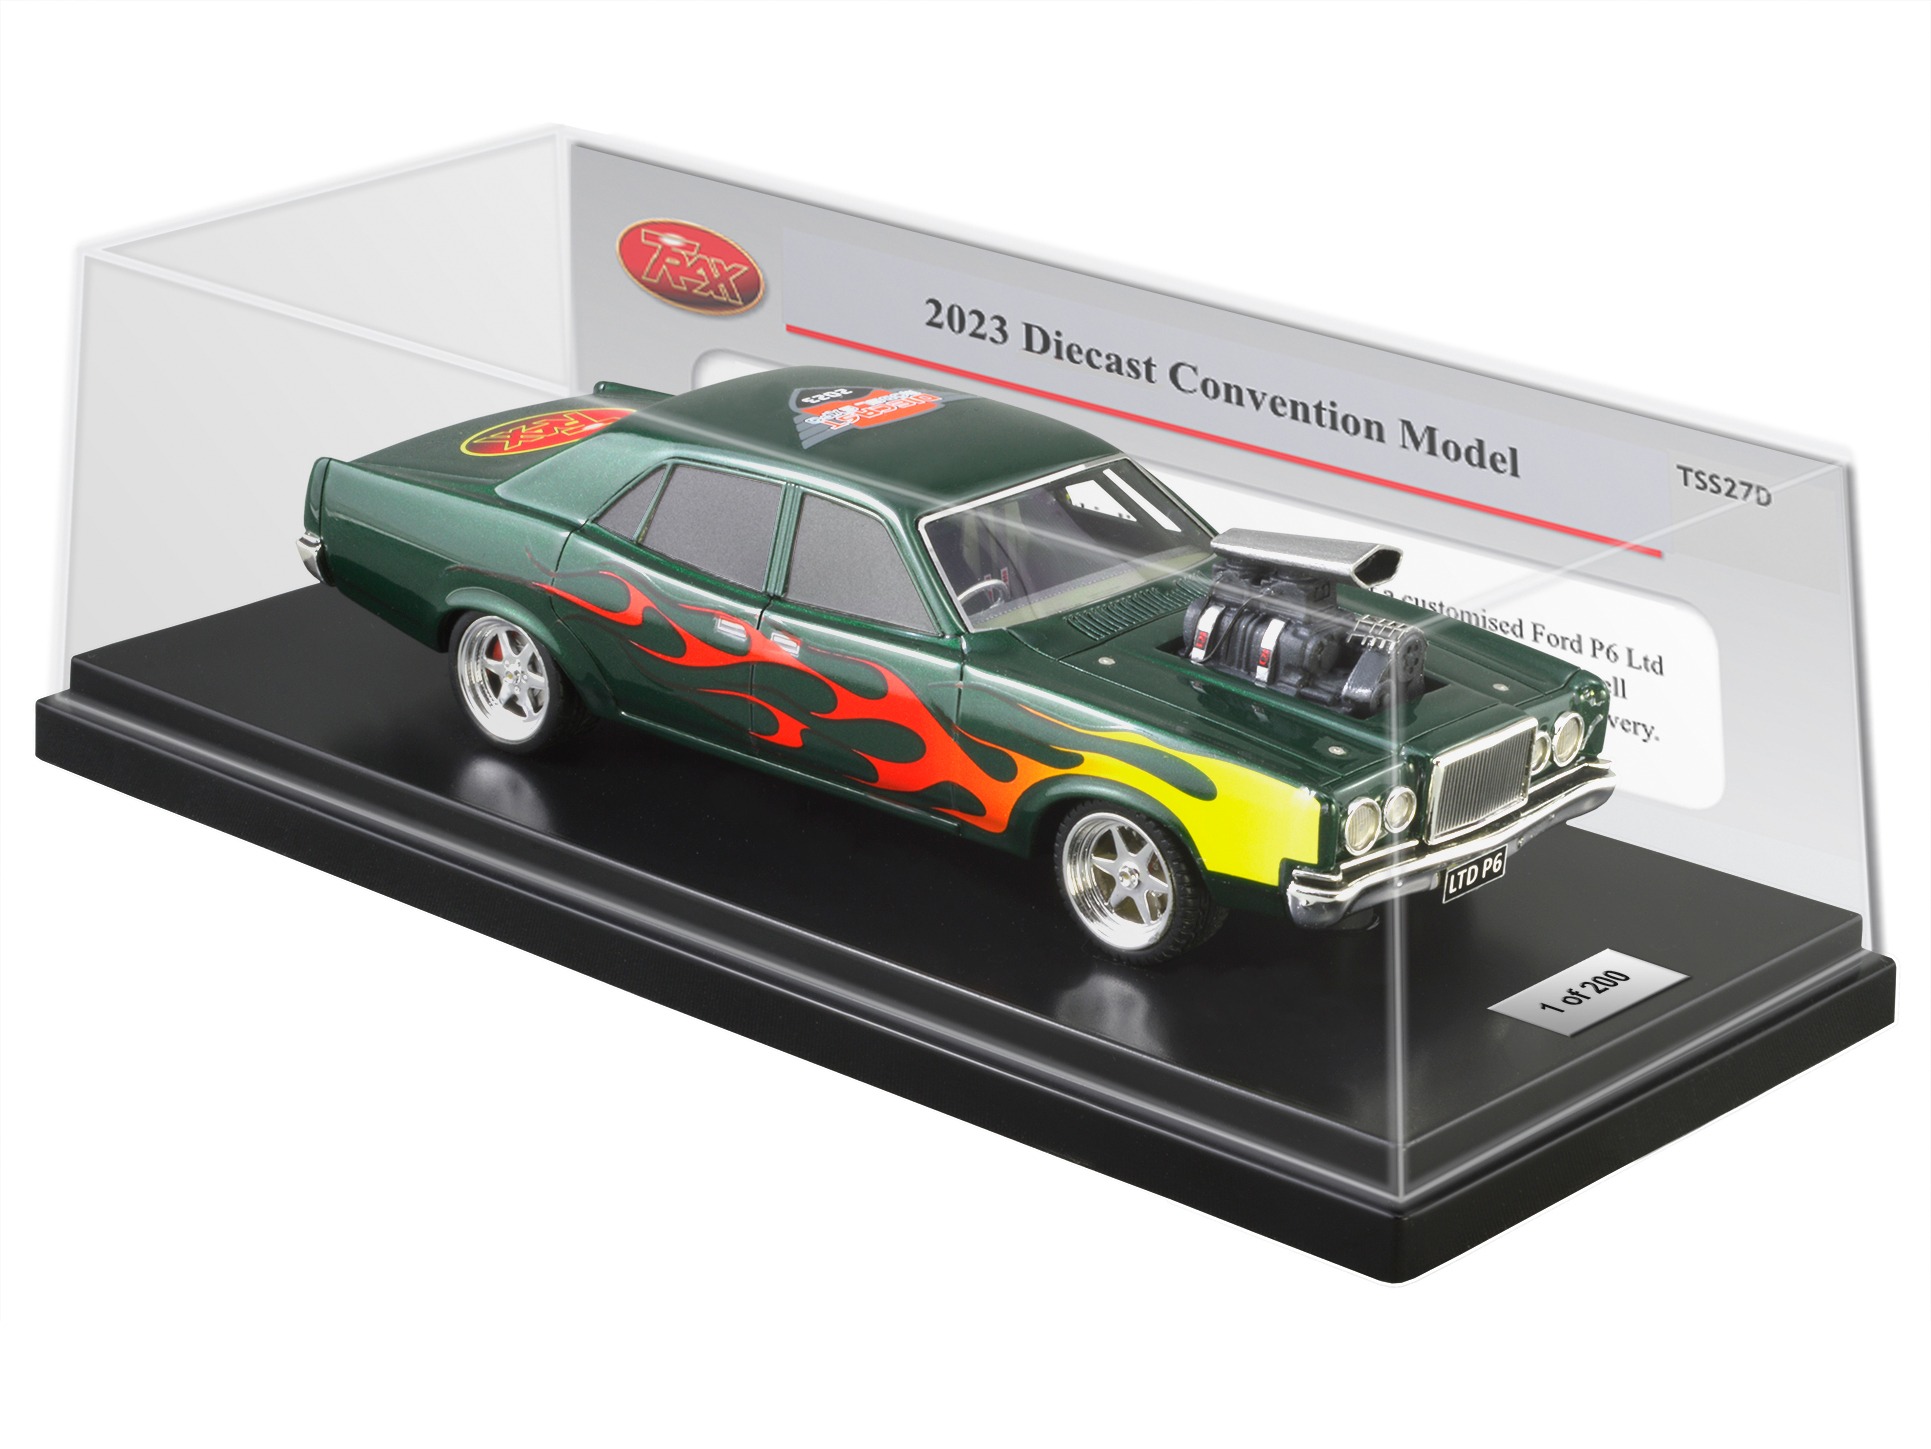 2023 Diecast Model Expo Convention Model – Ford P6 LTD